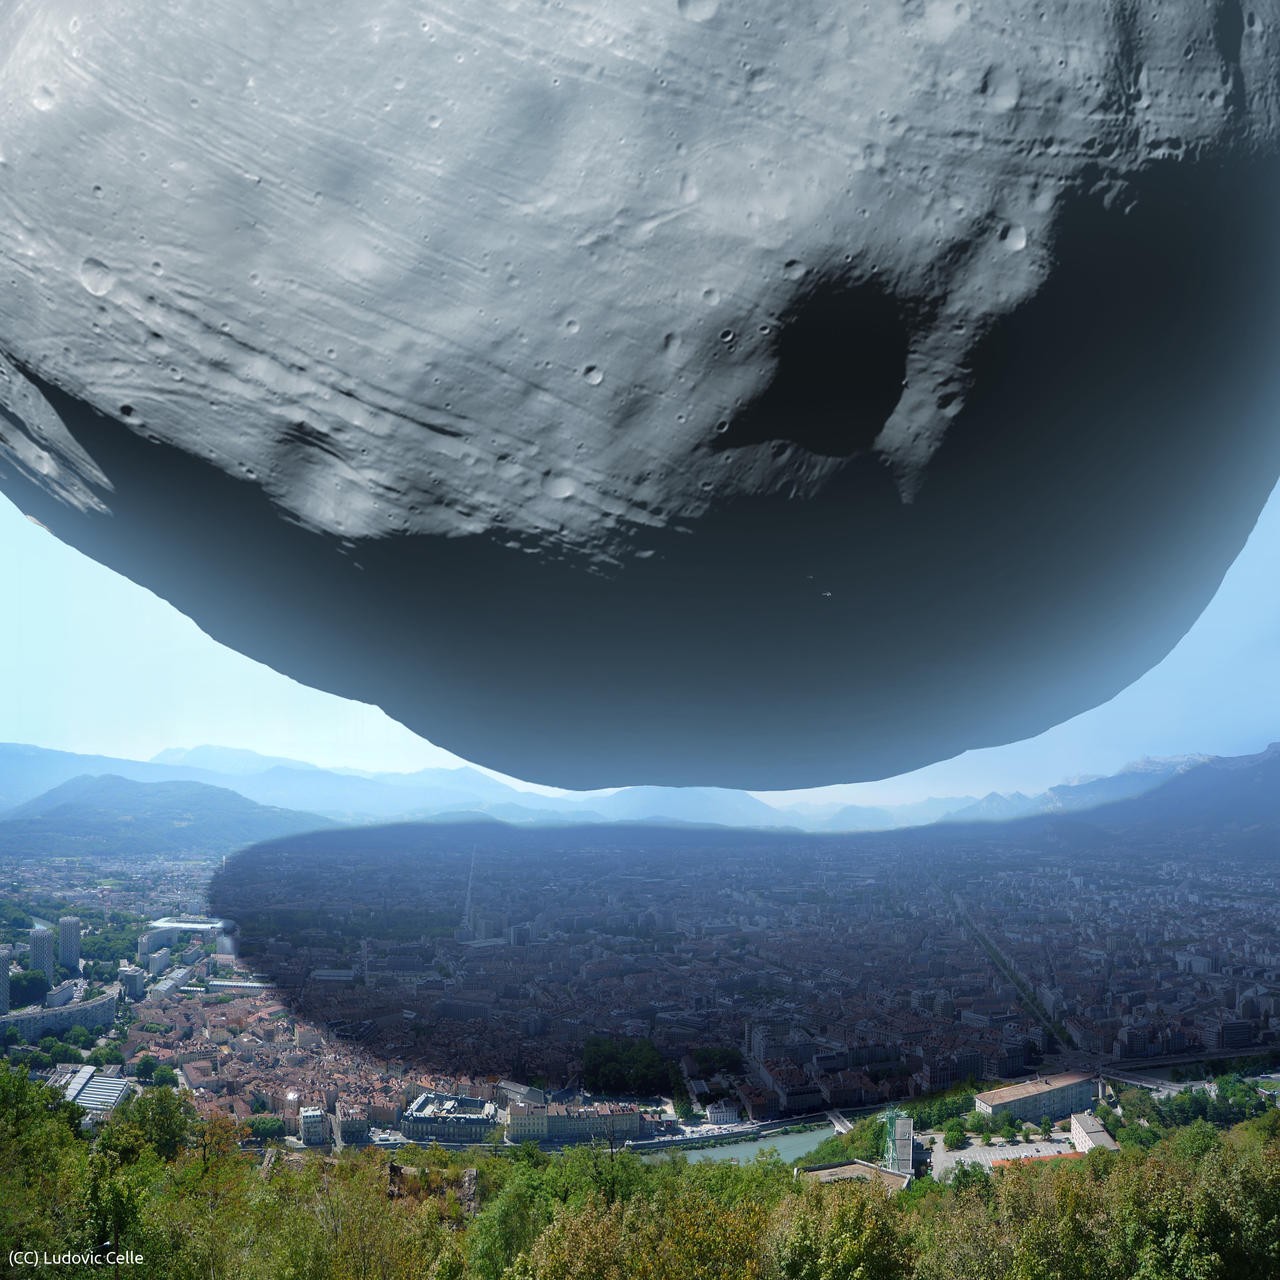 The scale of Phobos